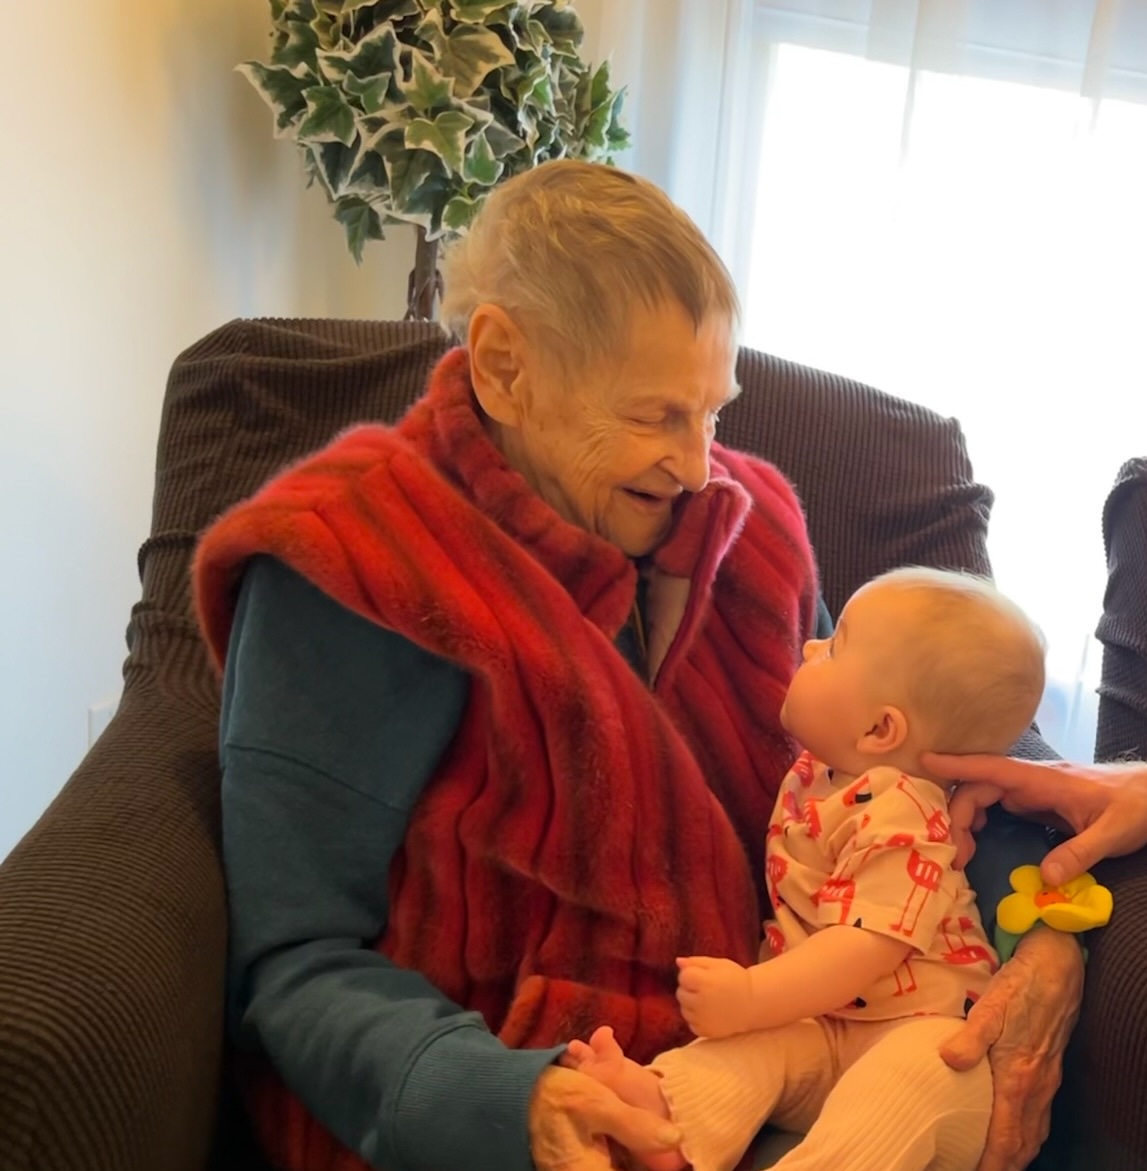 Mo-Mo meeting her great grandaughter for the first time.